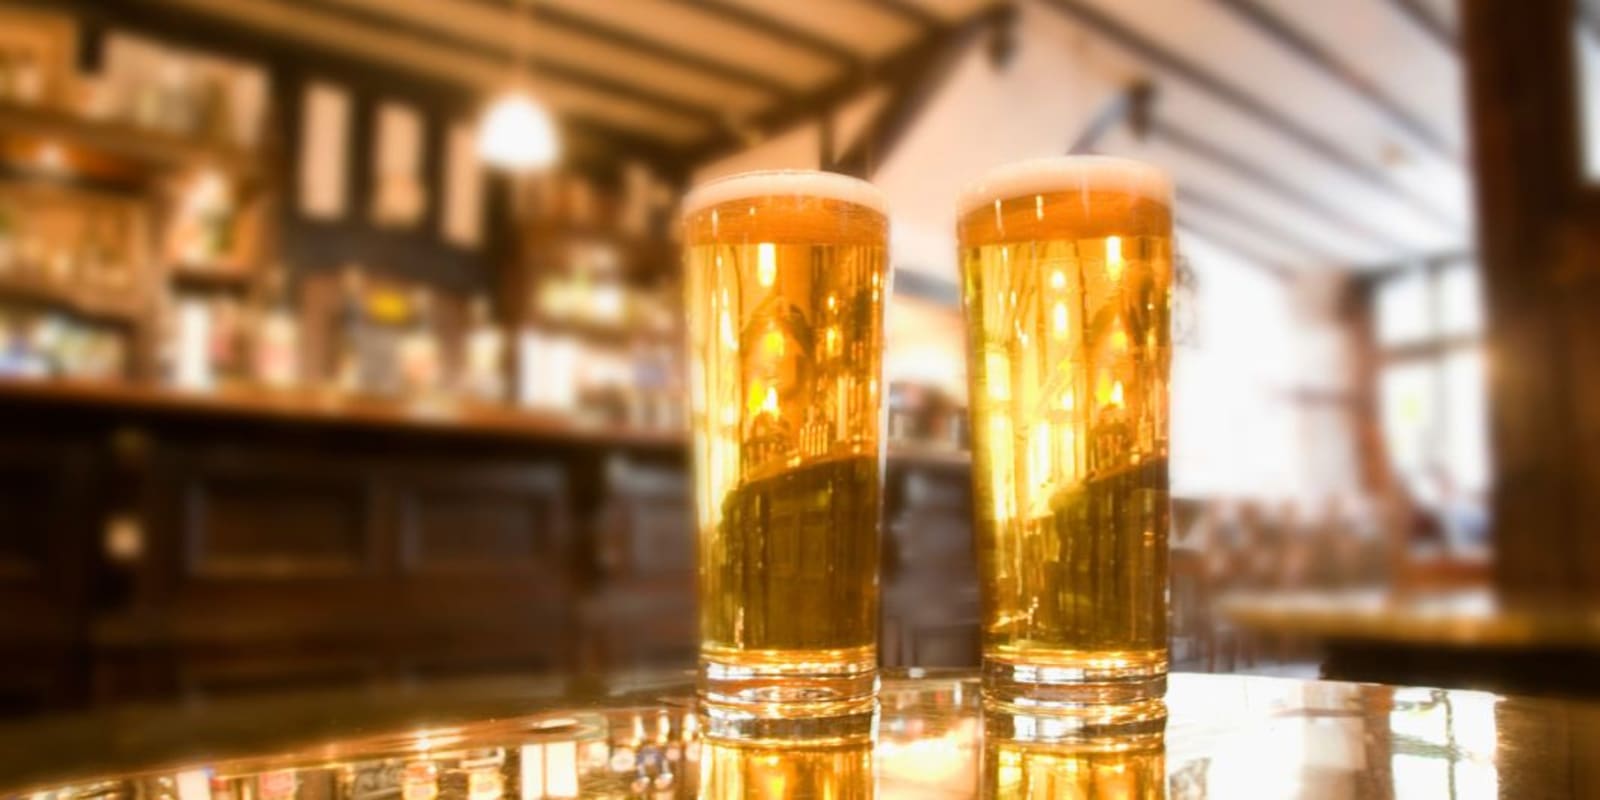 Two glasses of beer on a table in an English pub